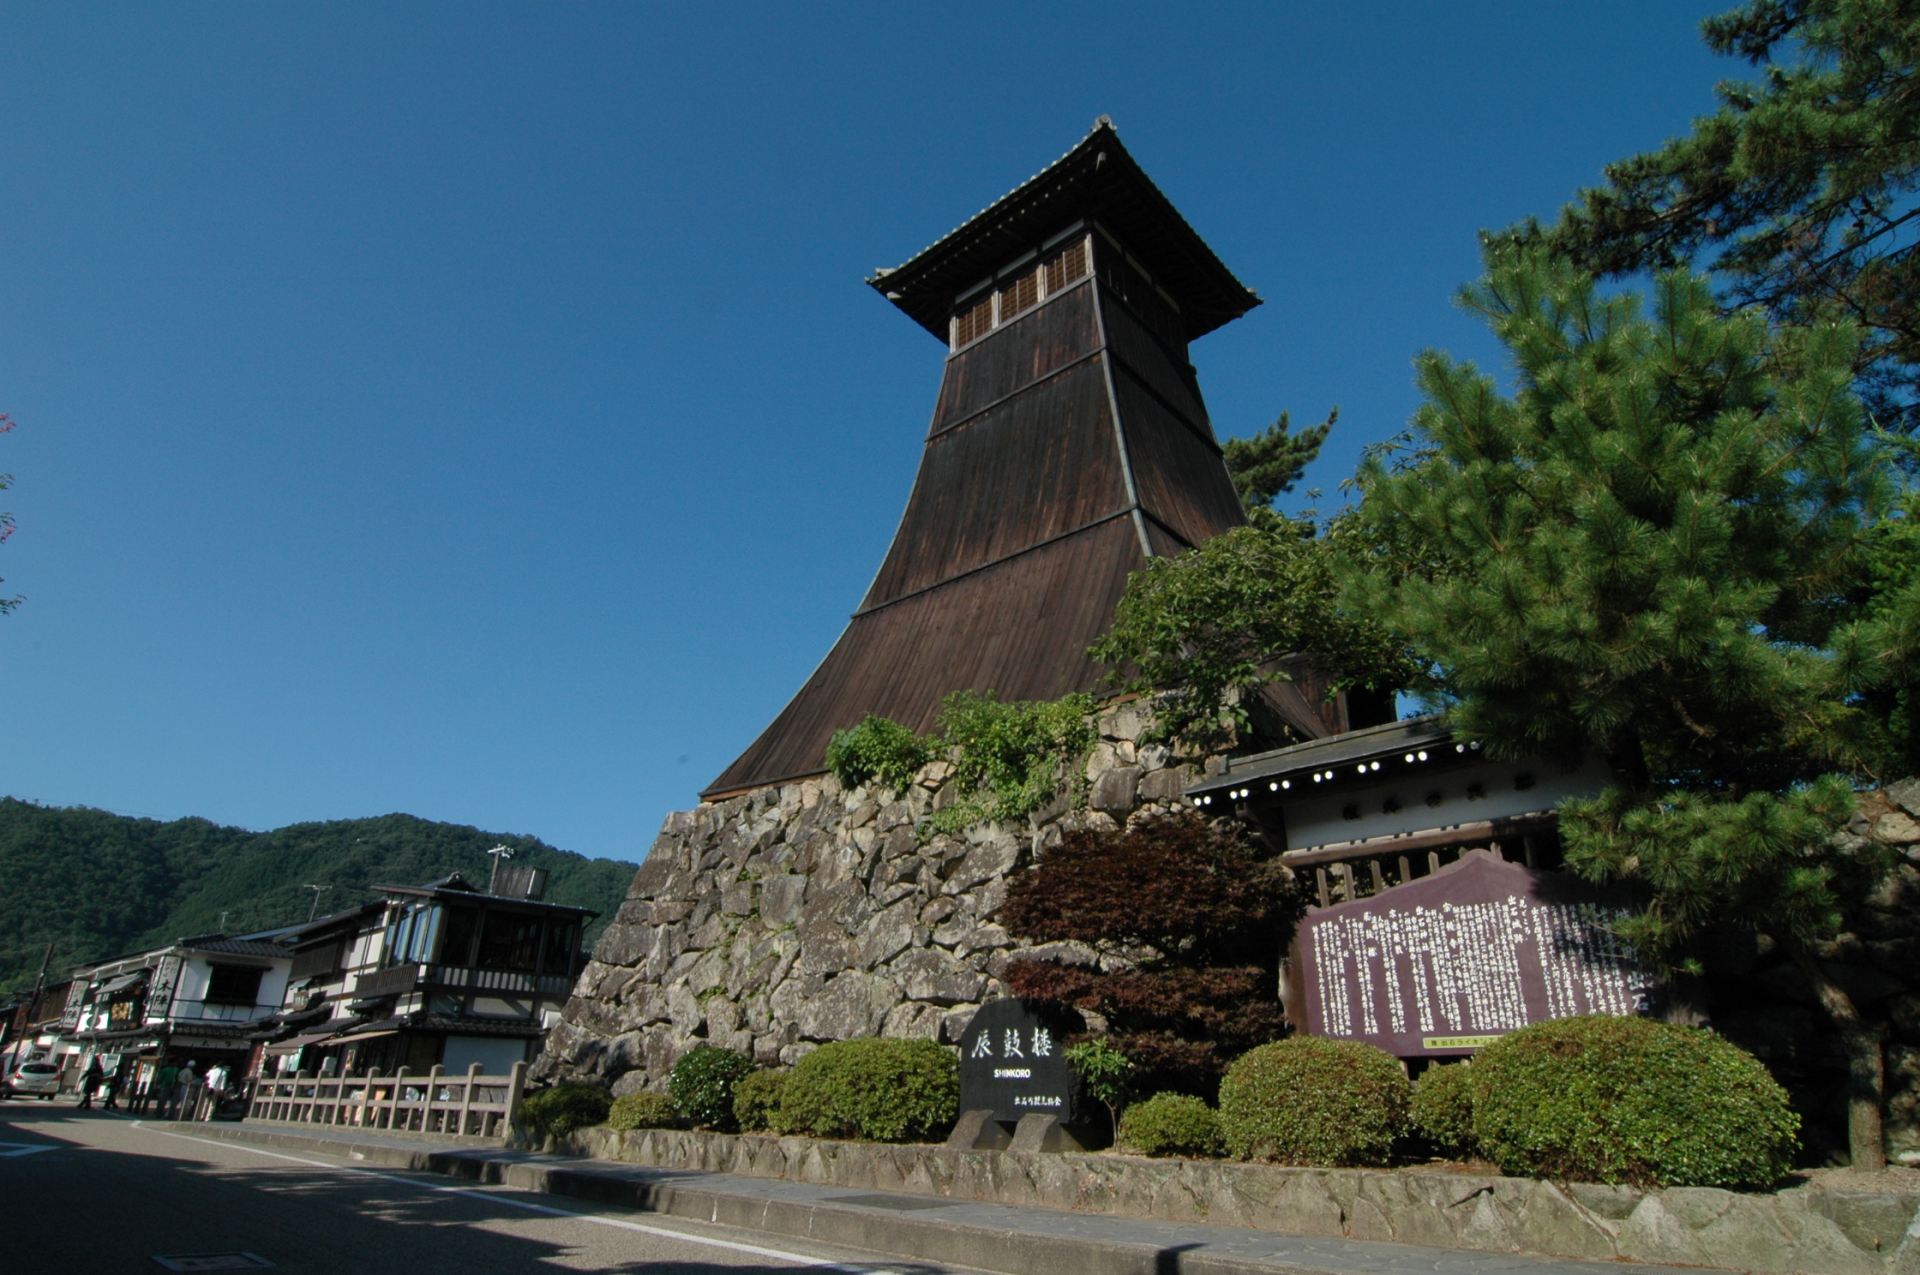 On Otemae Street, the Shinkoro clock tower adds ambiance to the town.